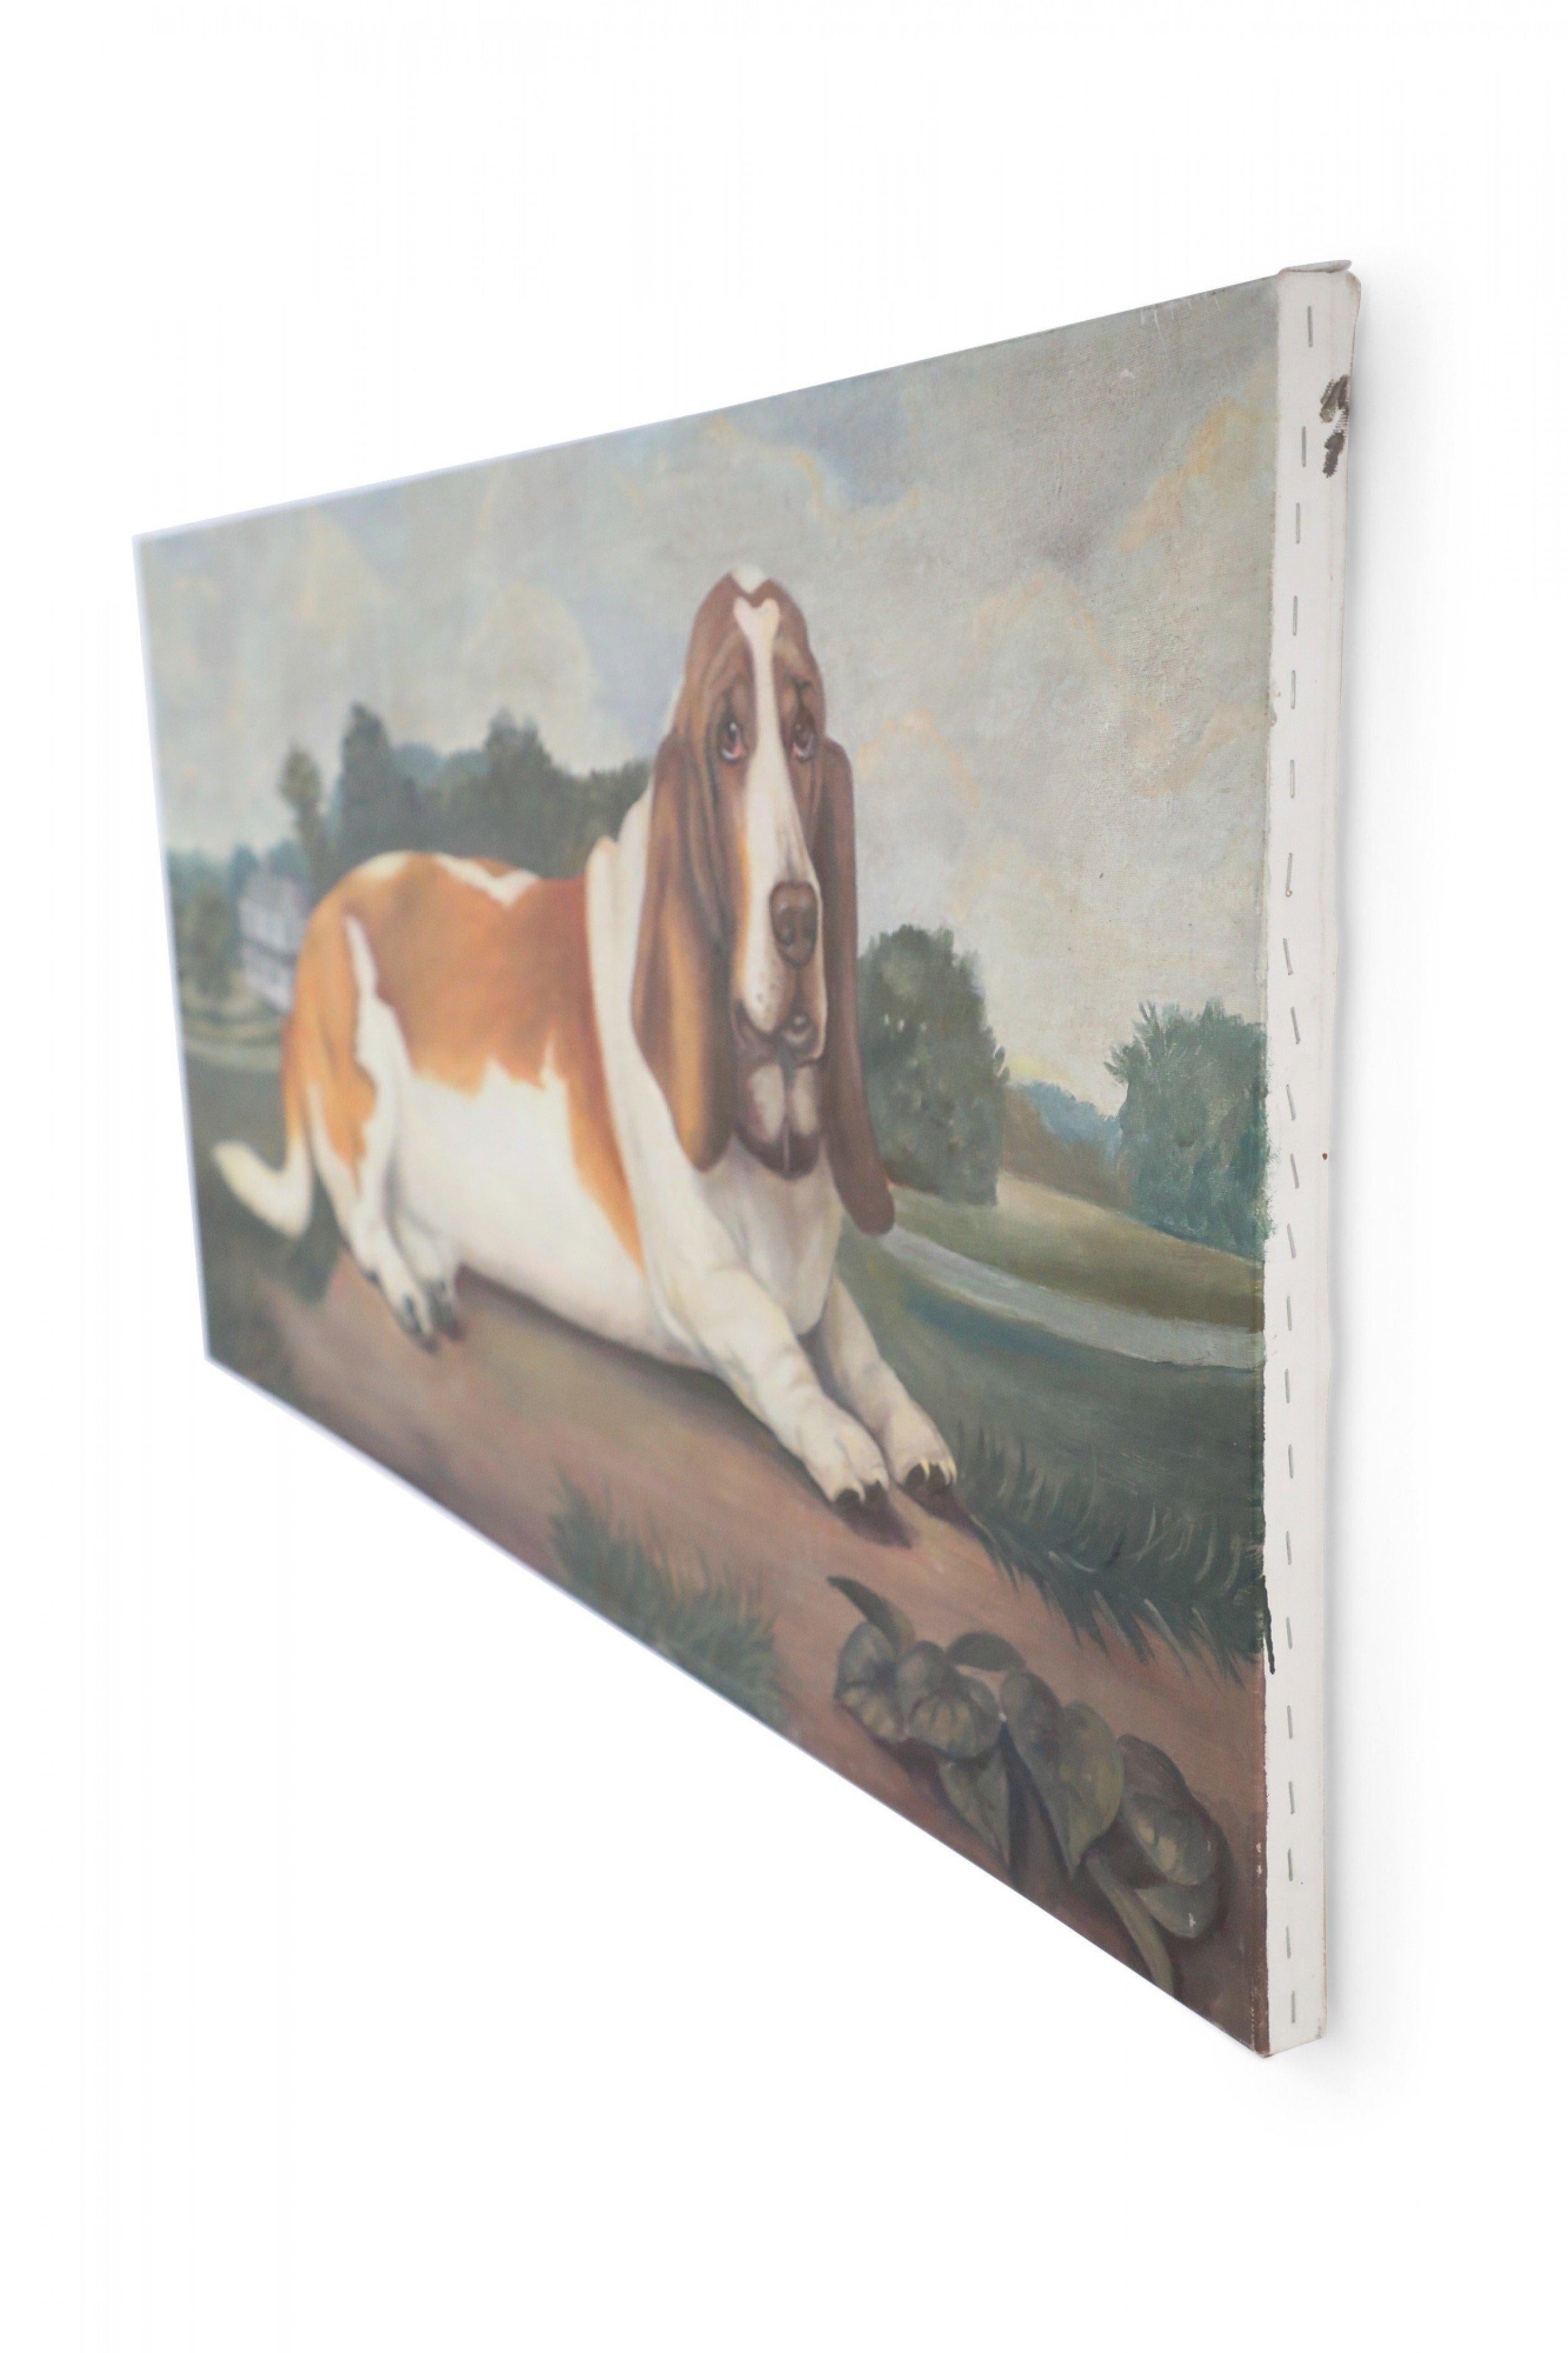 Vintage (20th Century) portrait of a brown and white basset hound captured lying on a path with a house in the distance, on a large, rectangular unframed canvas.